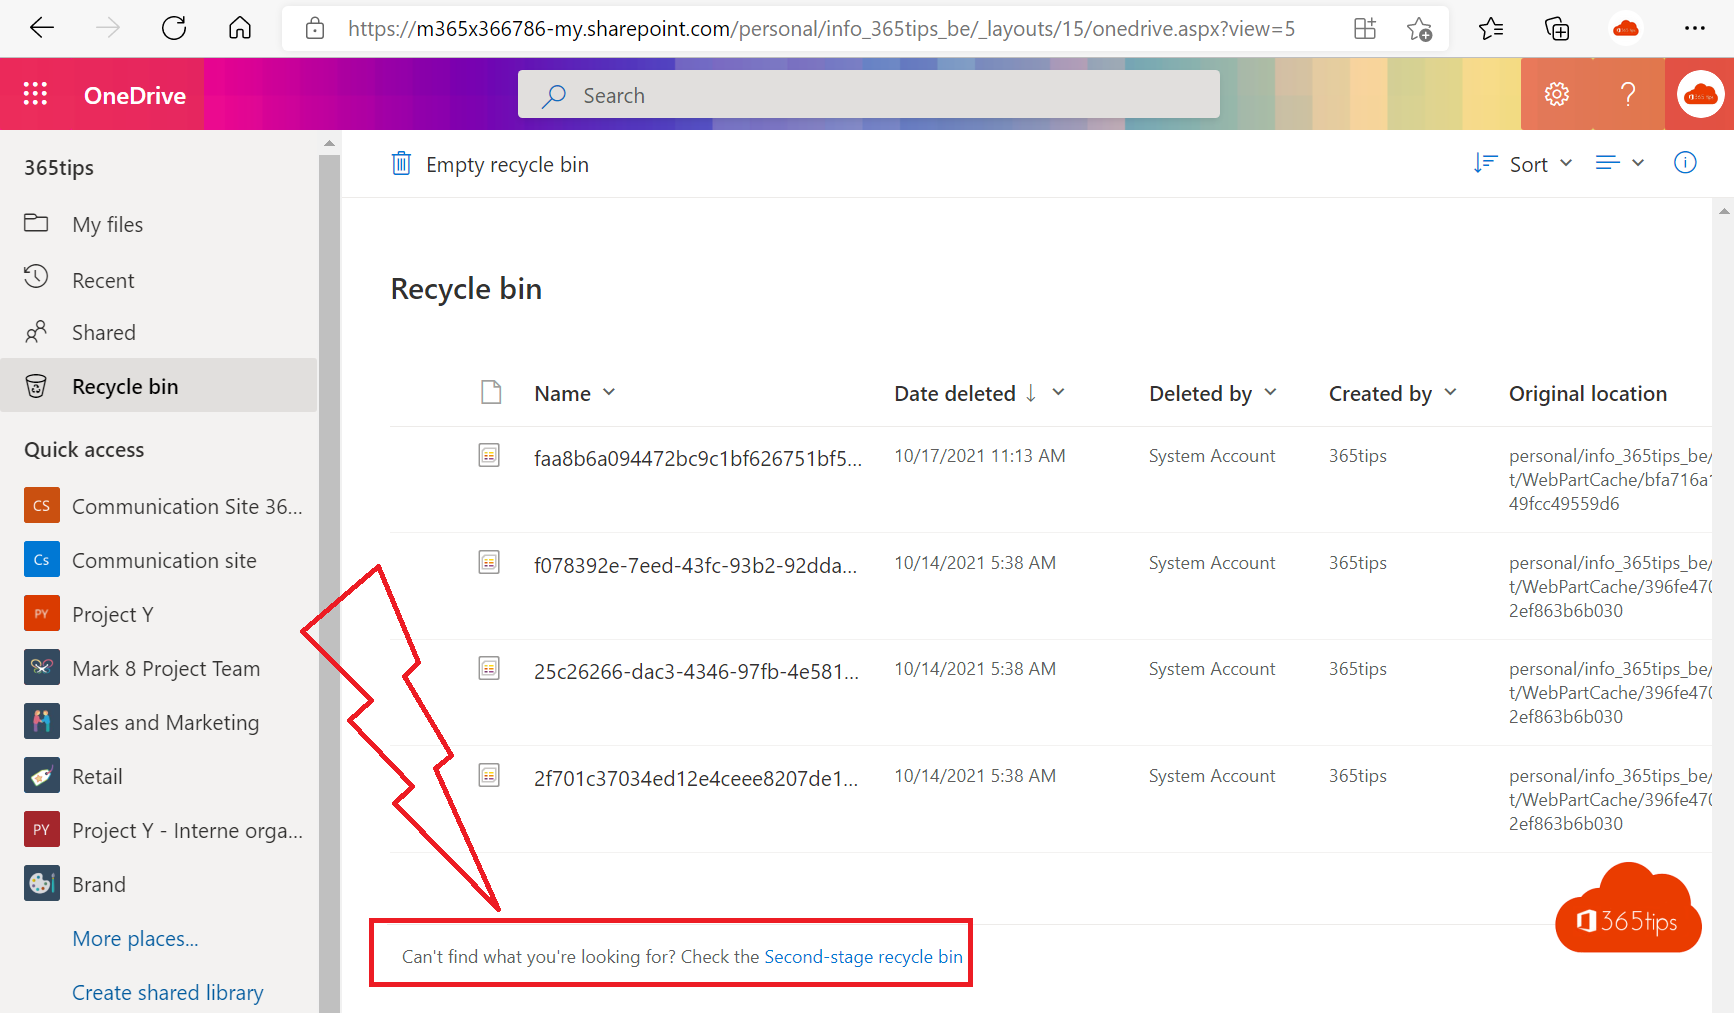 How to restore files up to 90 days after deletions in OneDrive for Business?